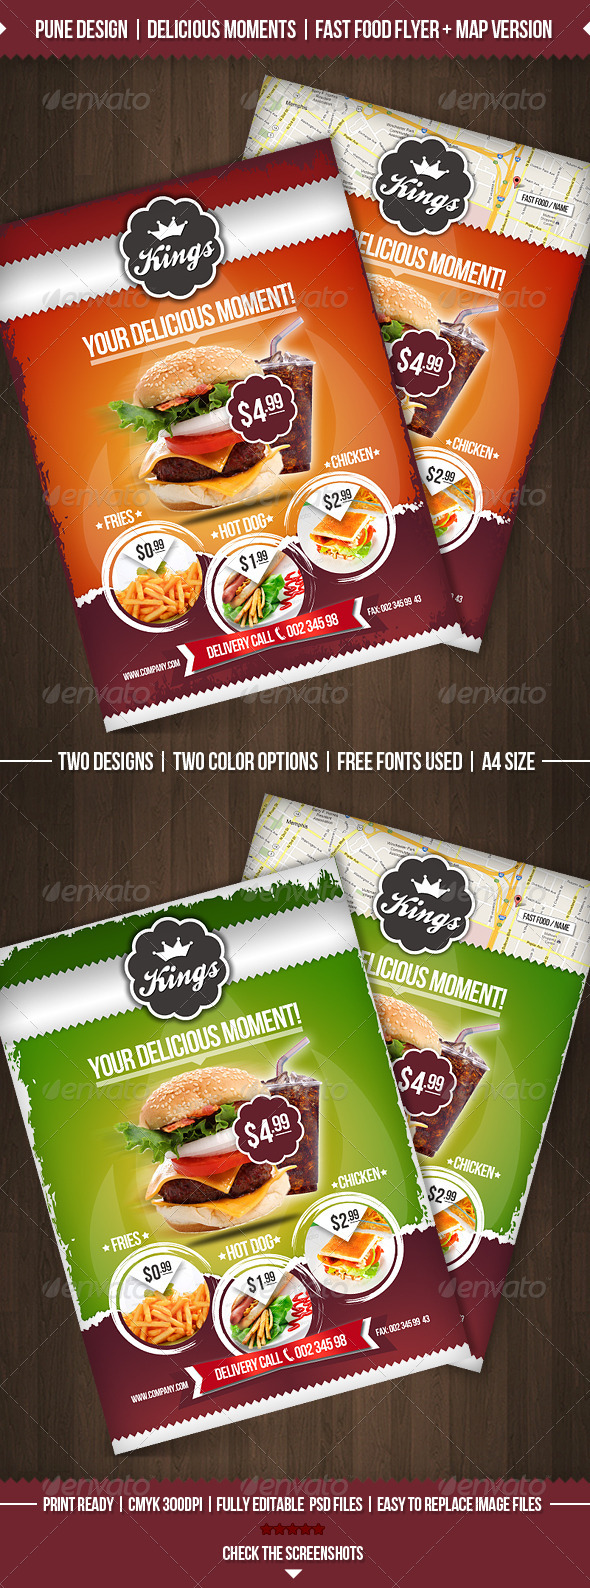 Fast Food Graphics Designs Templates From Graphicriver